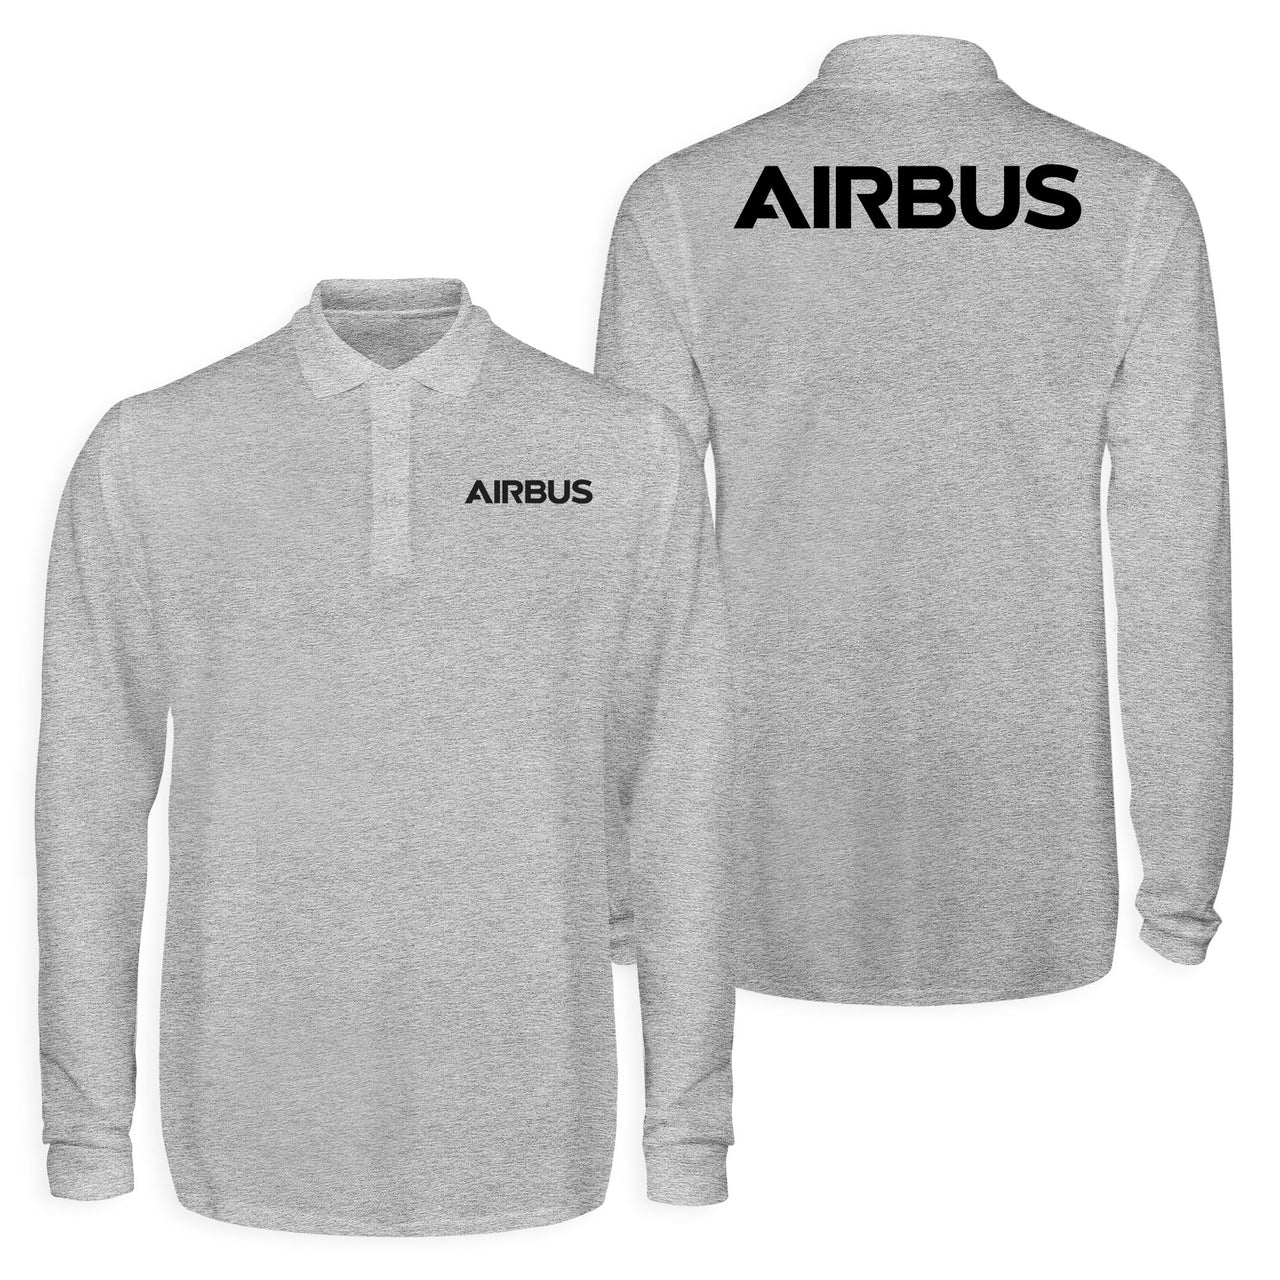 Airbus & Text Designed Long Sleeve Polo T-Shirts (Double-Side)